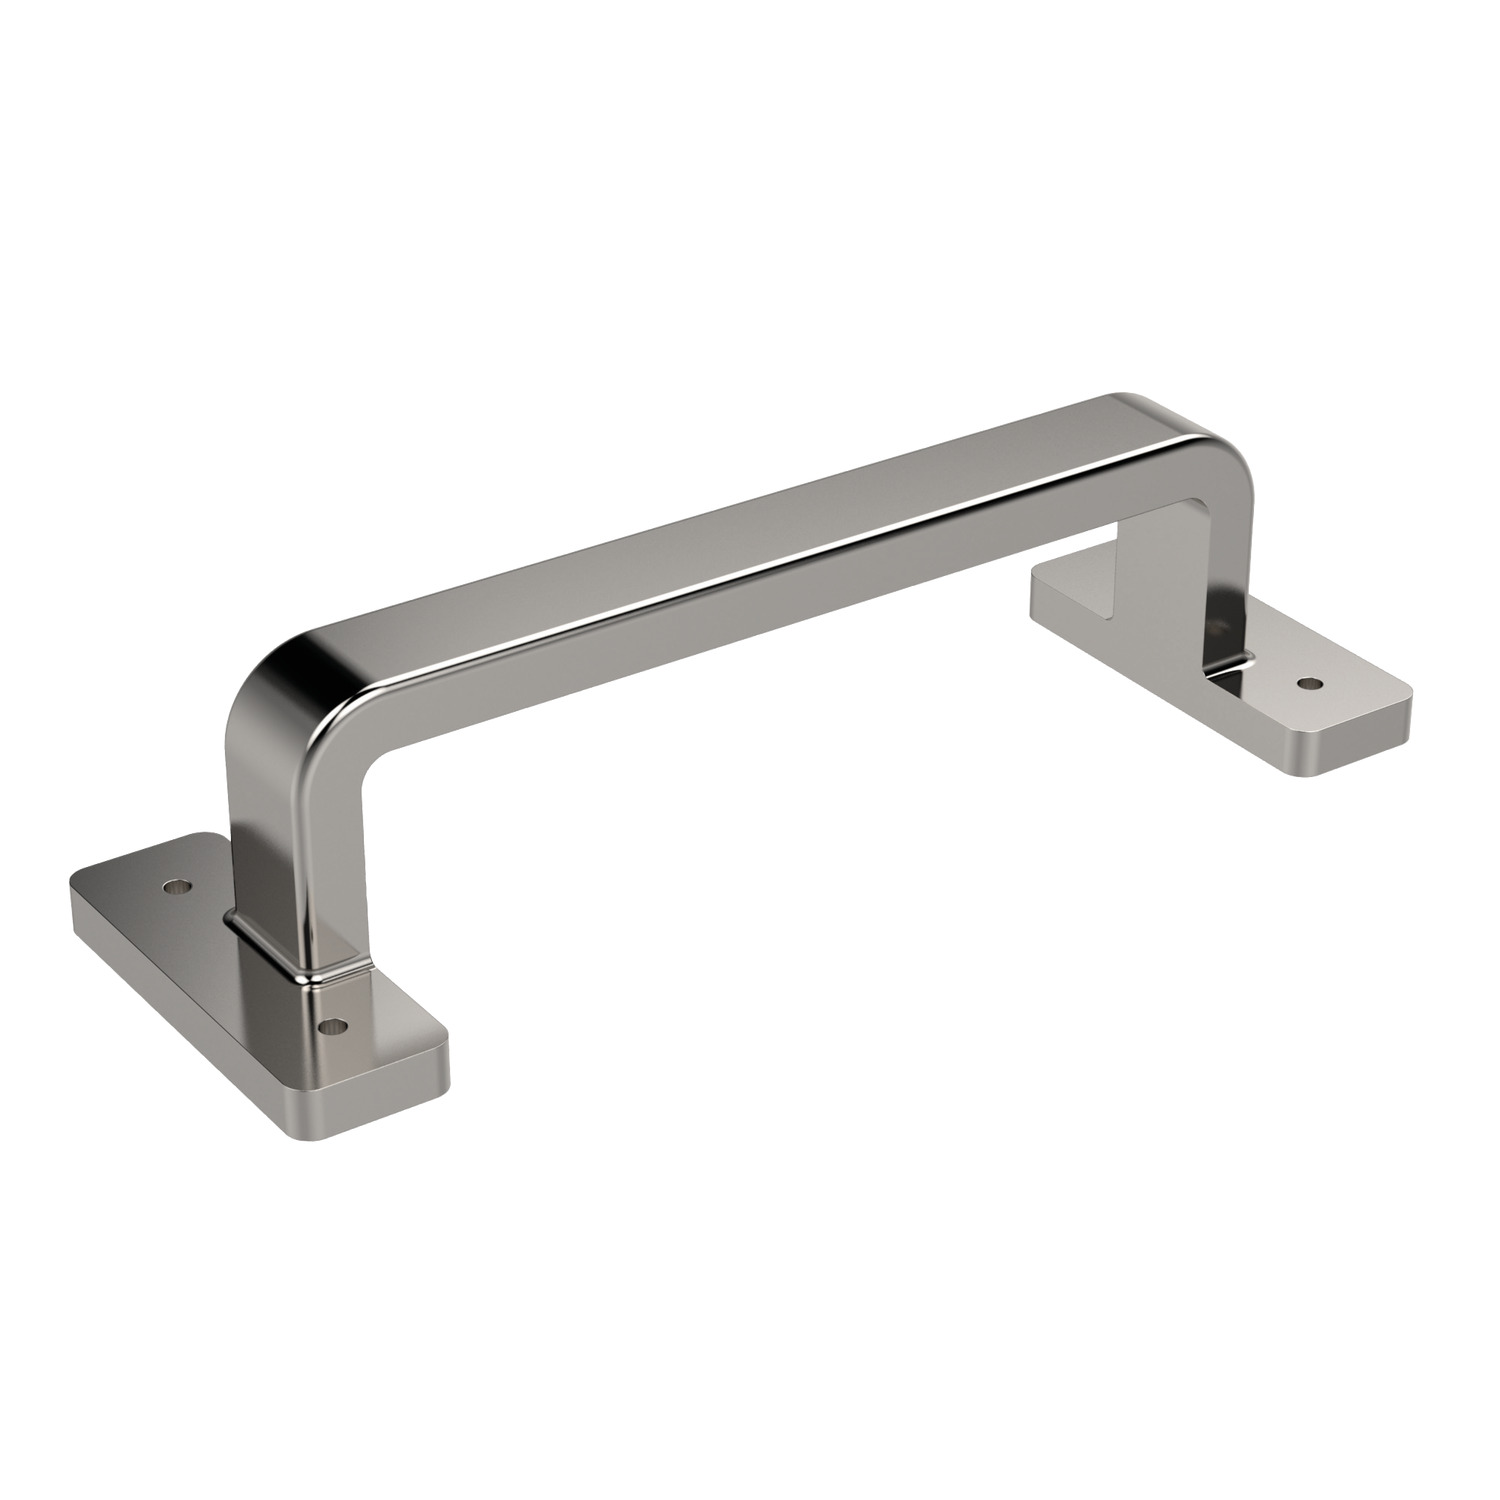 Product 78950, Pull Handles, Stainless Steel  / 